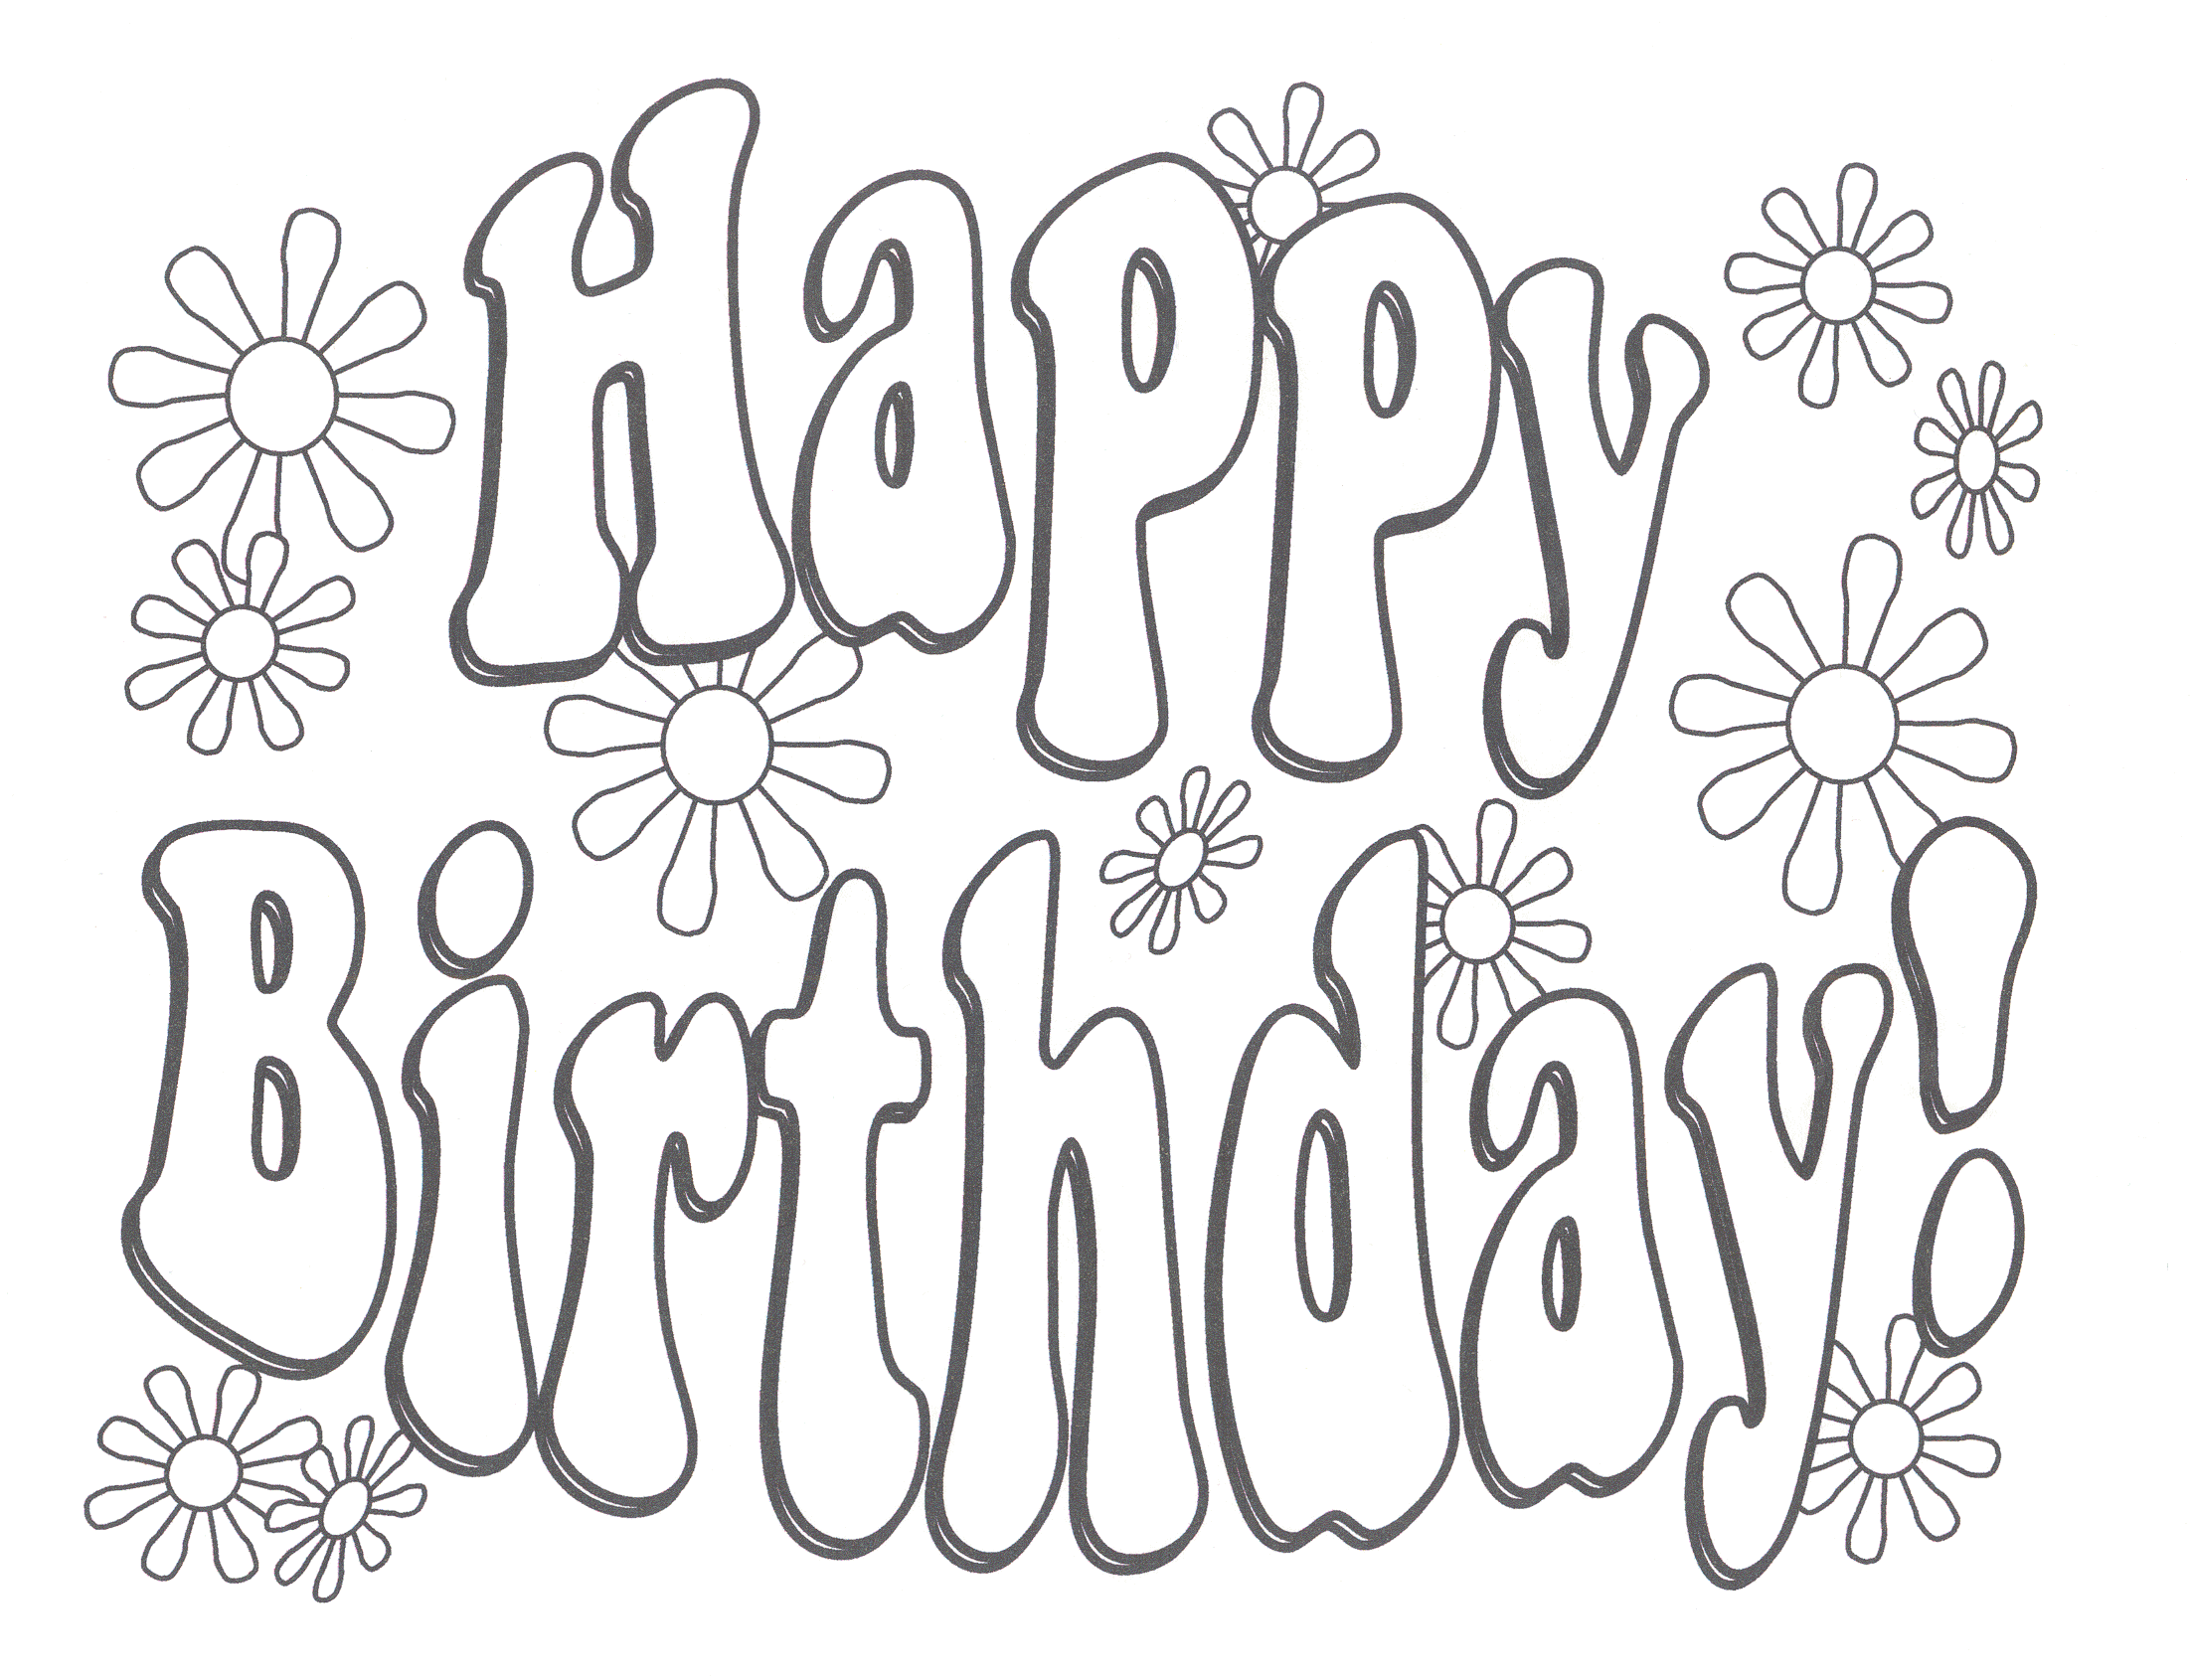 14 happy birthday coloring pages for kids Print Color Craft